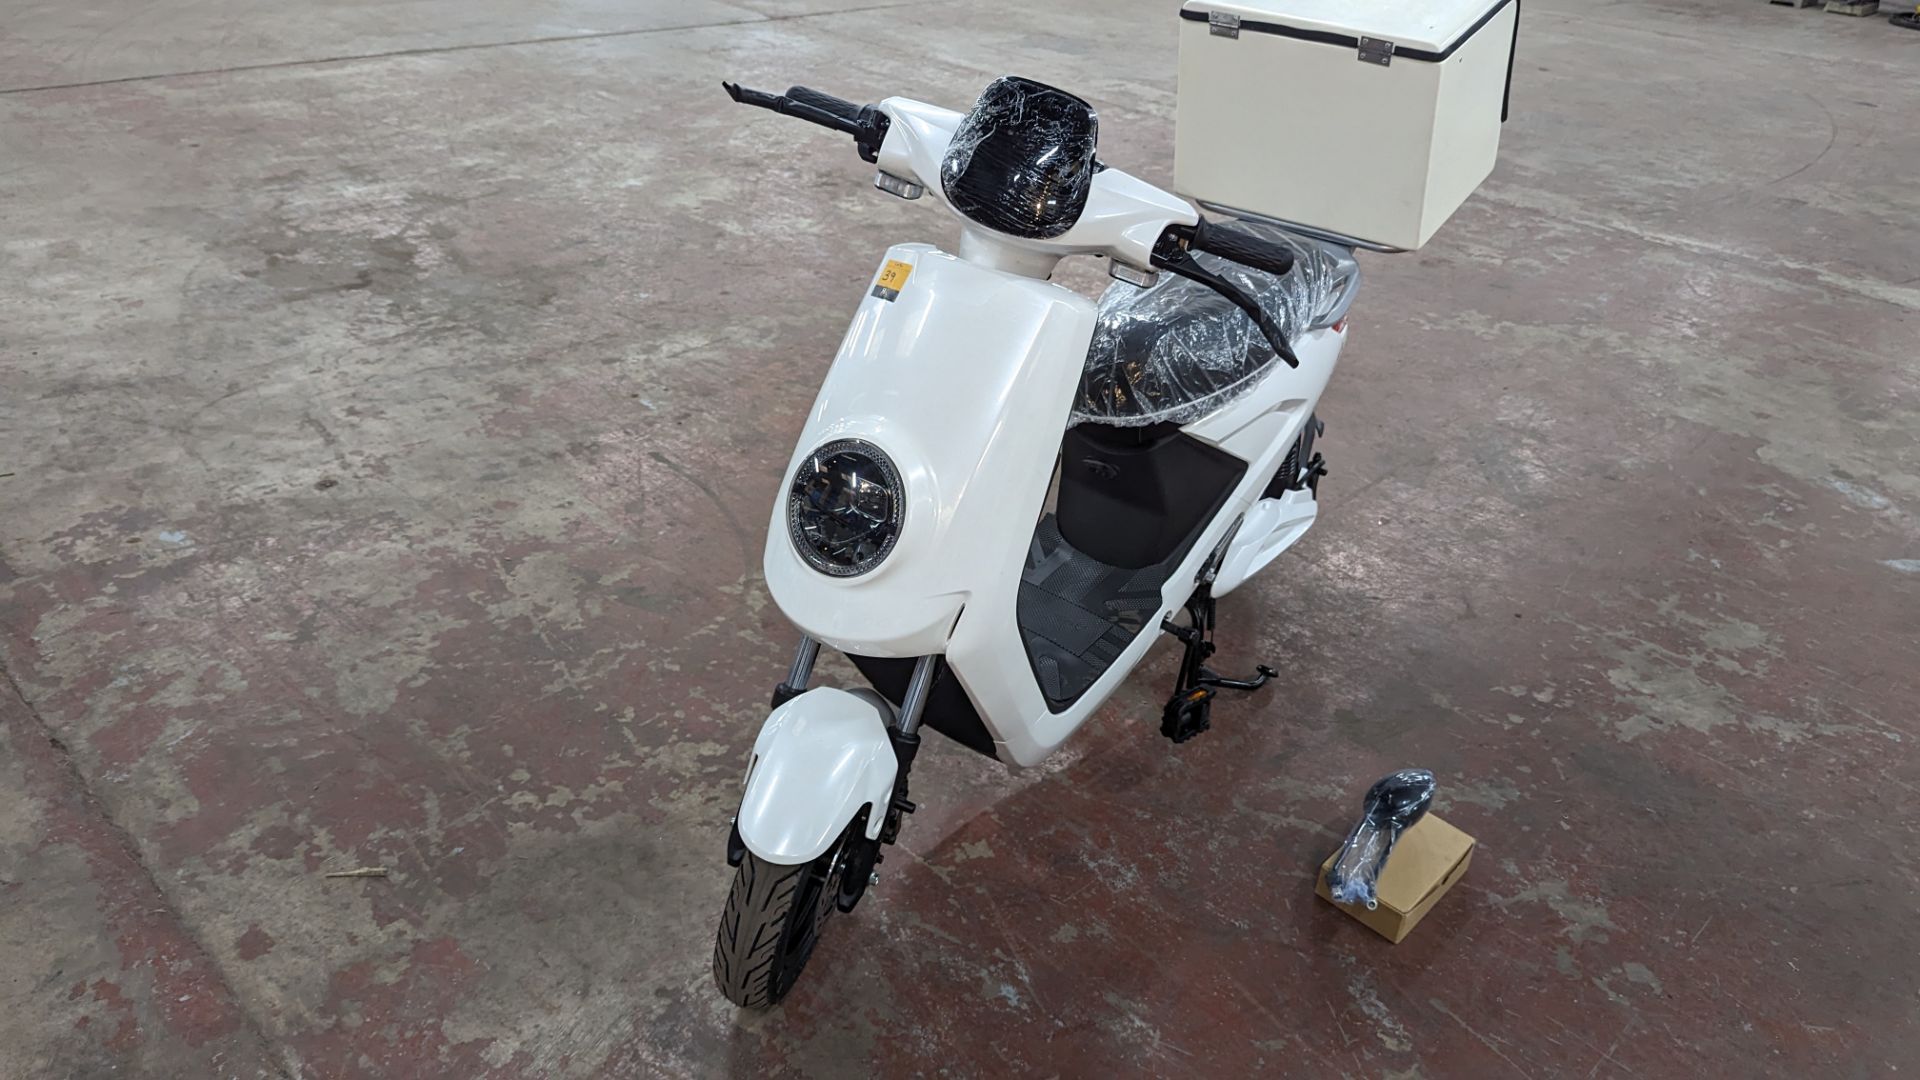 Model 18 Electric Bike: Zero (0) recorded miles, white body with black detailing, insulated box moun - Image 9 of 14